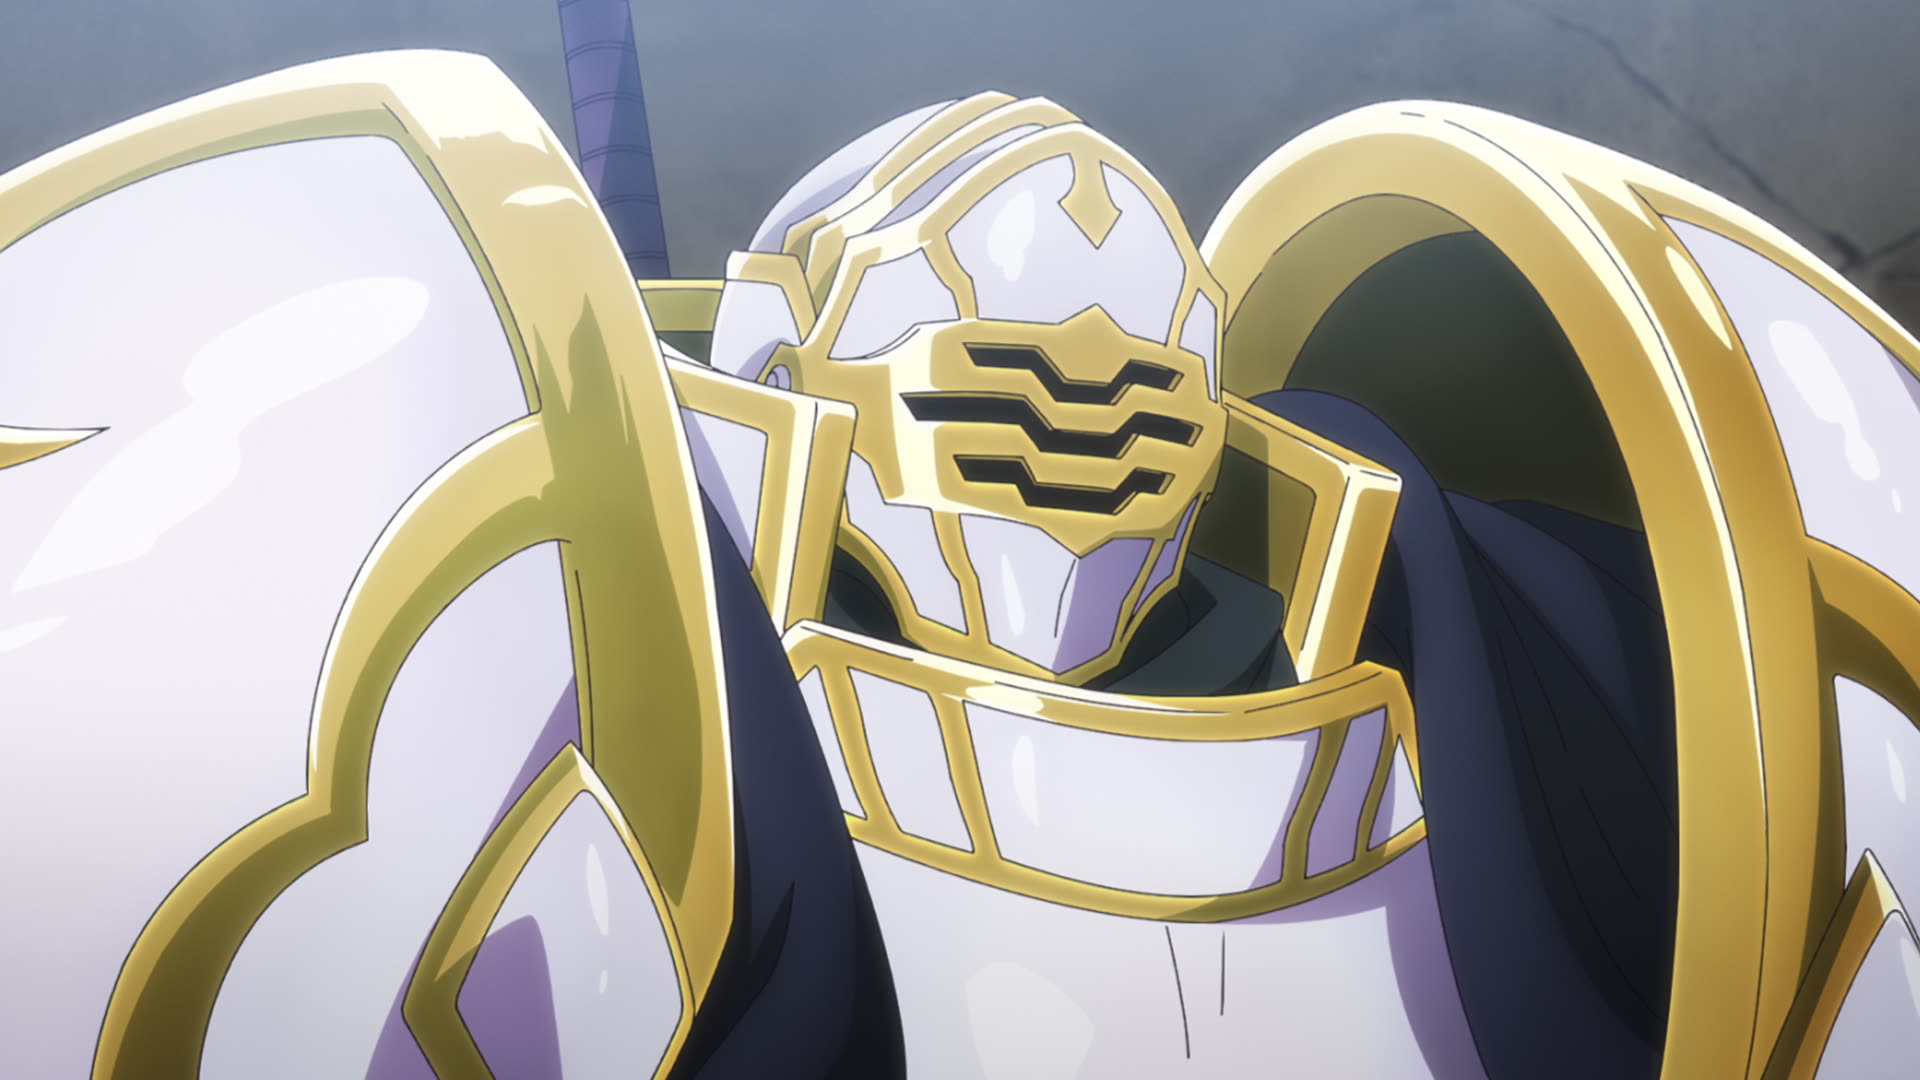 Skeleton Knight in Another World Épisode The Wandering Knight Sets Out to Make the World a Better Place Attachments area, sur Crunchyroll